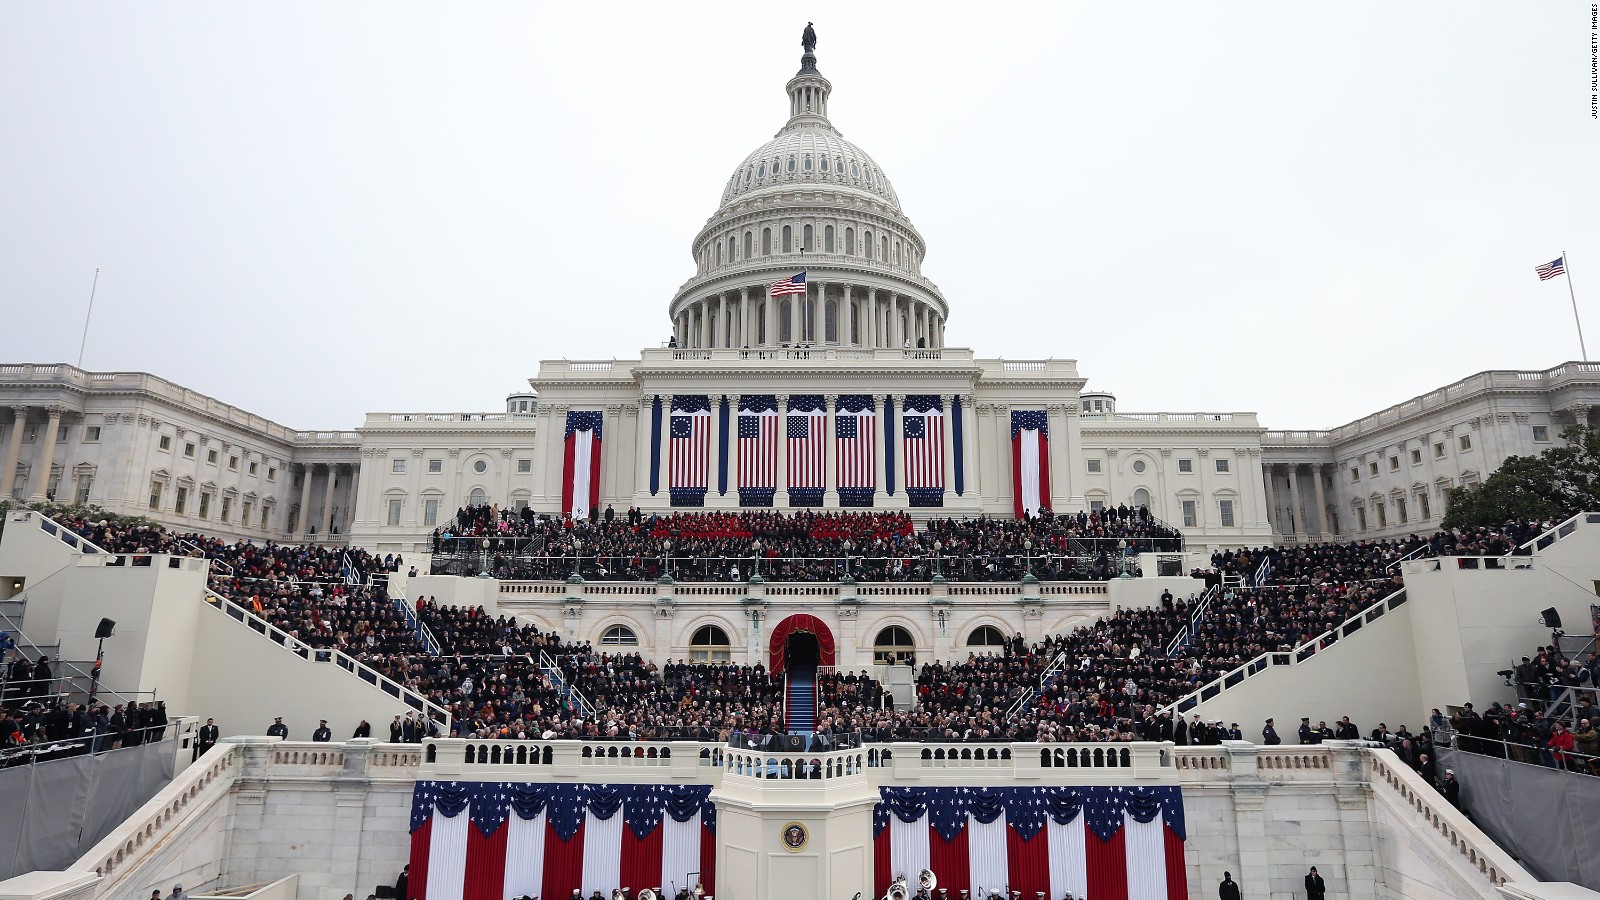 The White House during Inauguration Day